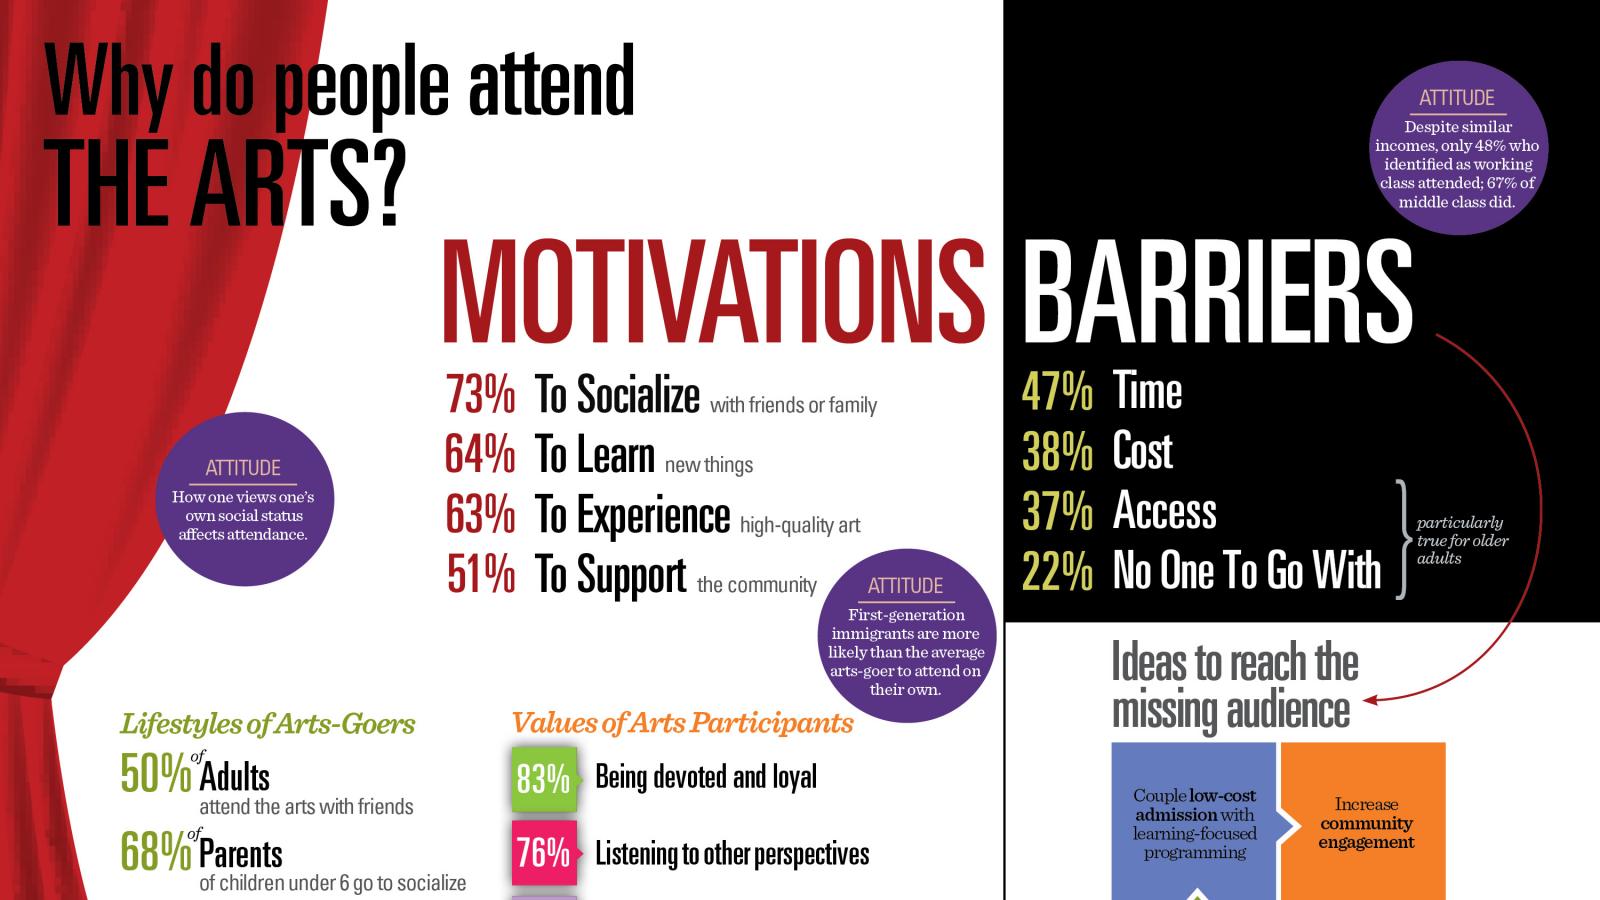 An infographic that examines motivations and barriers to arts attendance